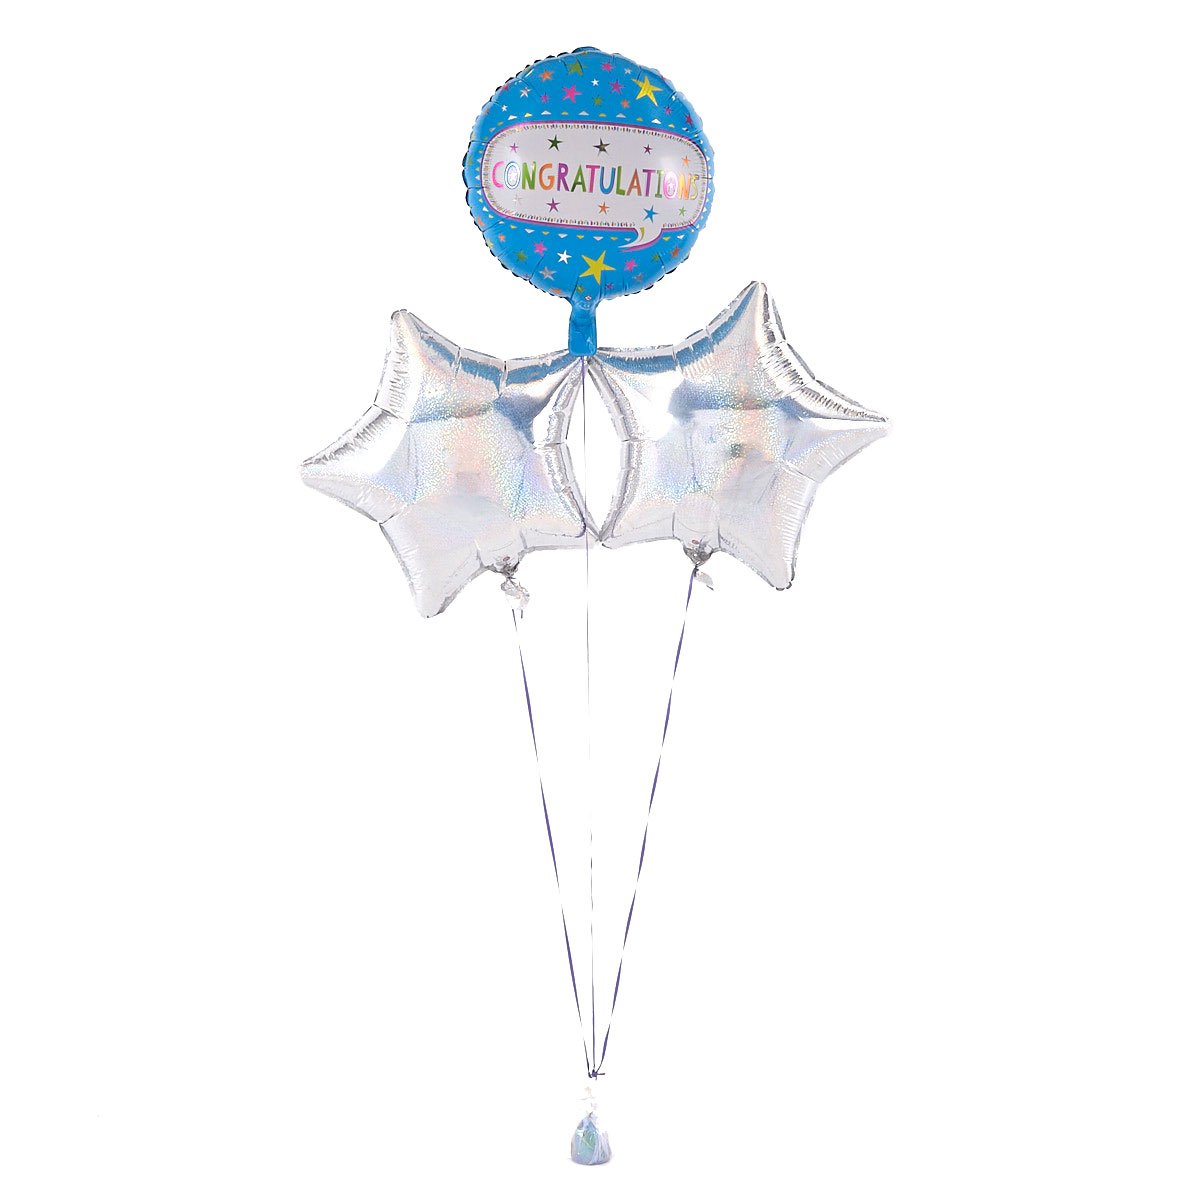 Congratulations Blue Balloon with Silver Balloon Bouquet - DELIVERED INFLATED!